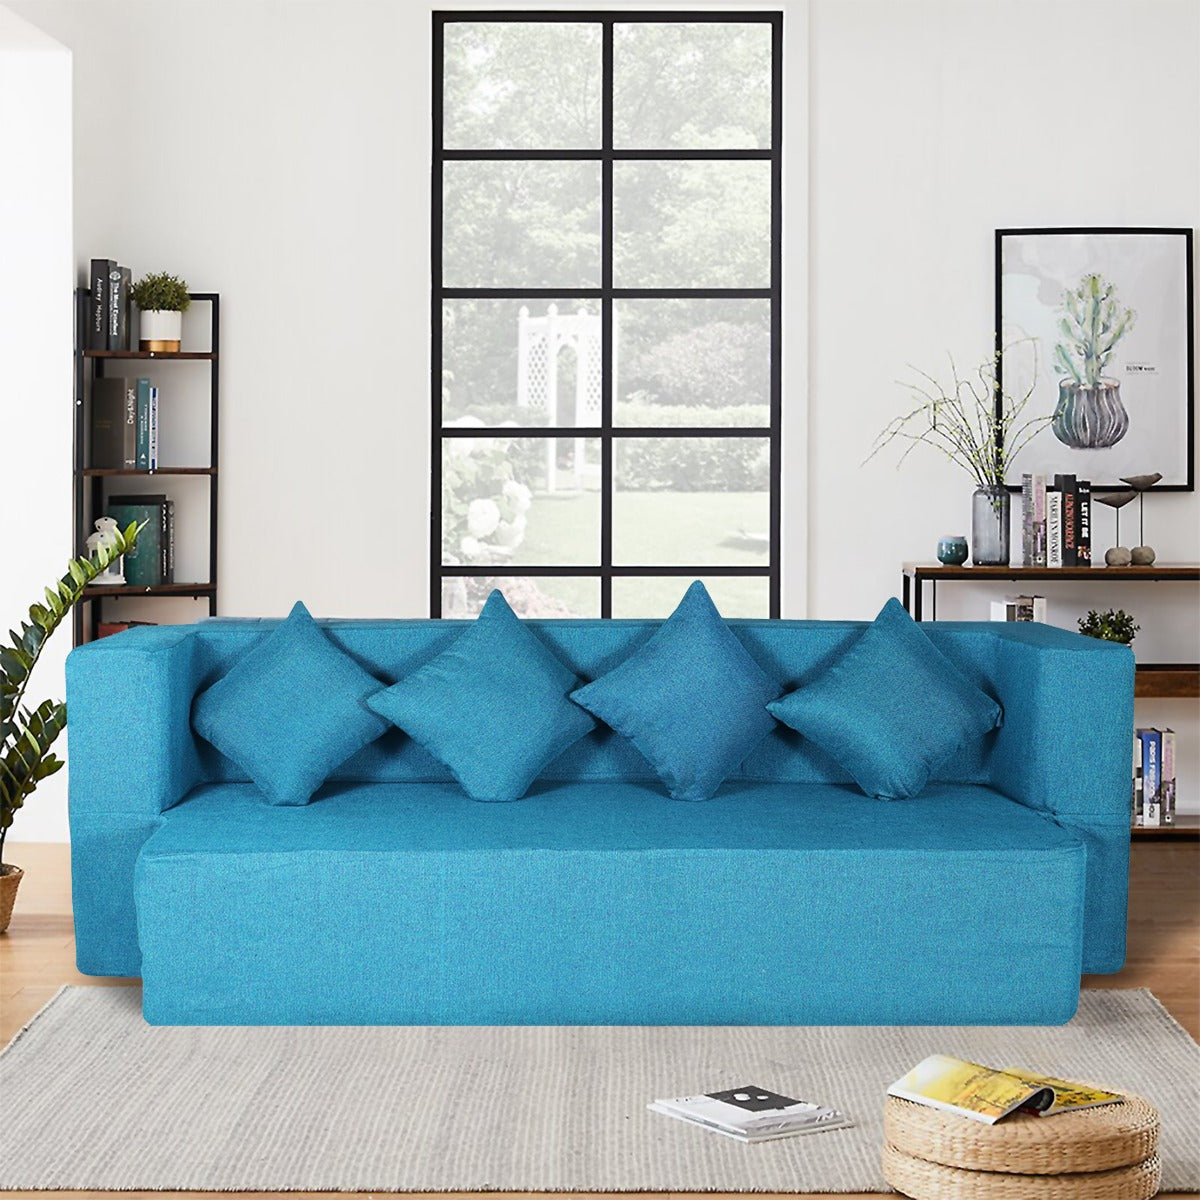 Cover of Blue Jute Fabric (78"x36"x14") FlipperX Sofa cum Bed with 4 Plain Cushion Covers